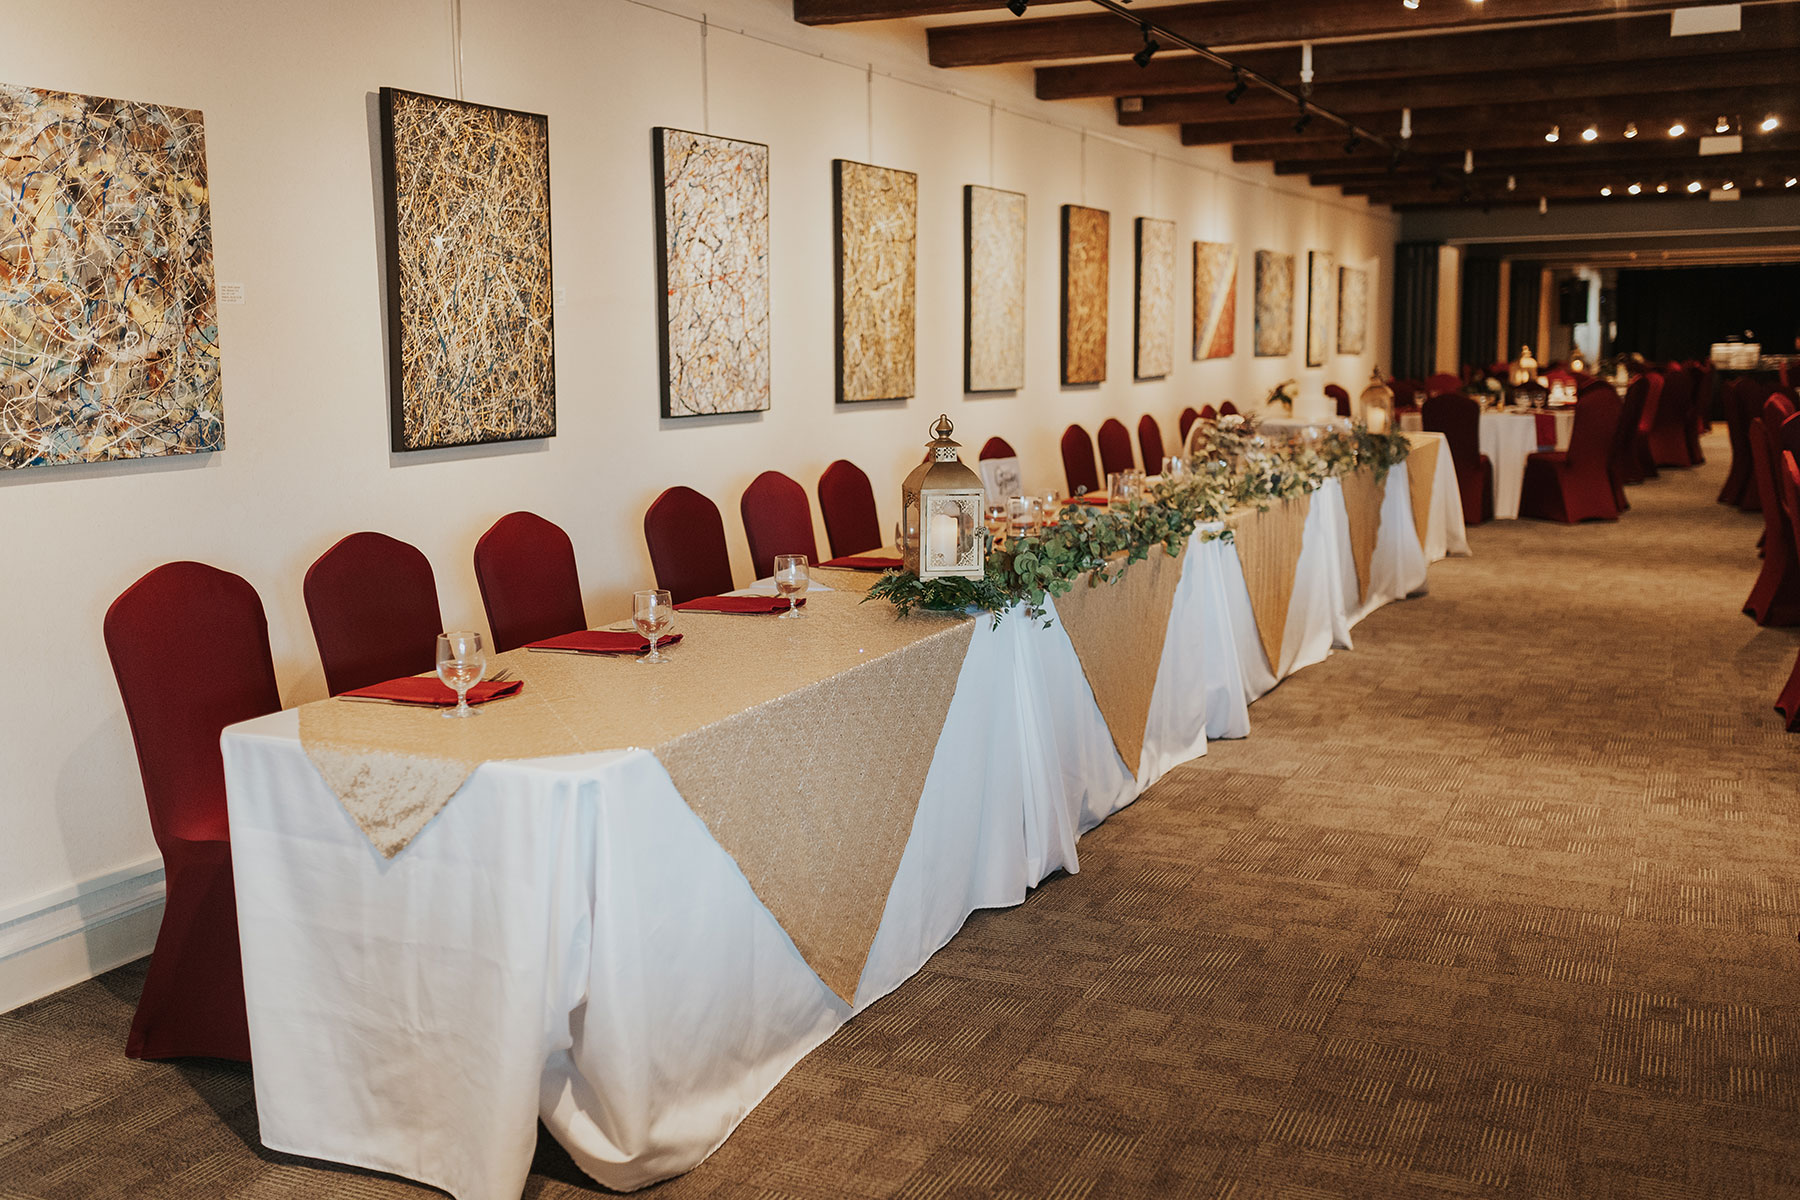 Reception Gallery with head table